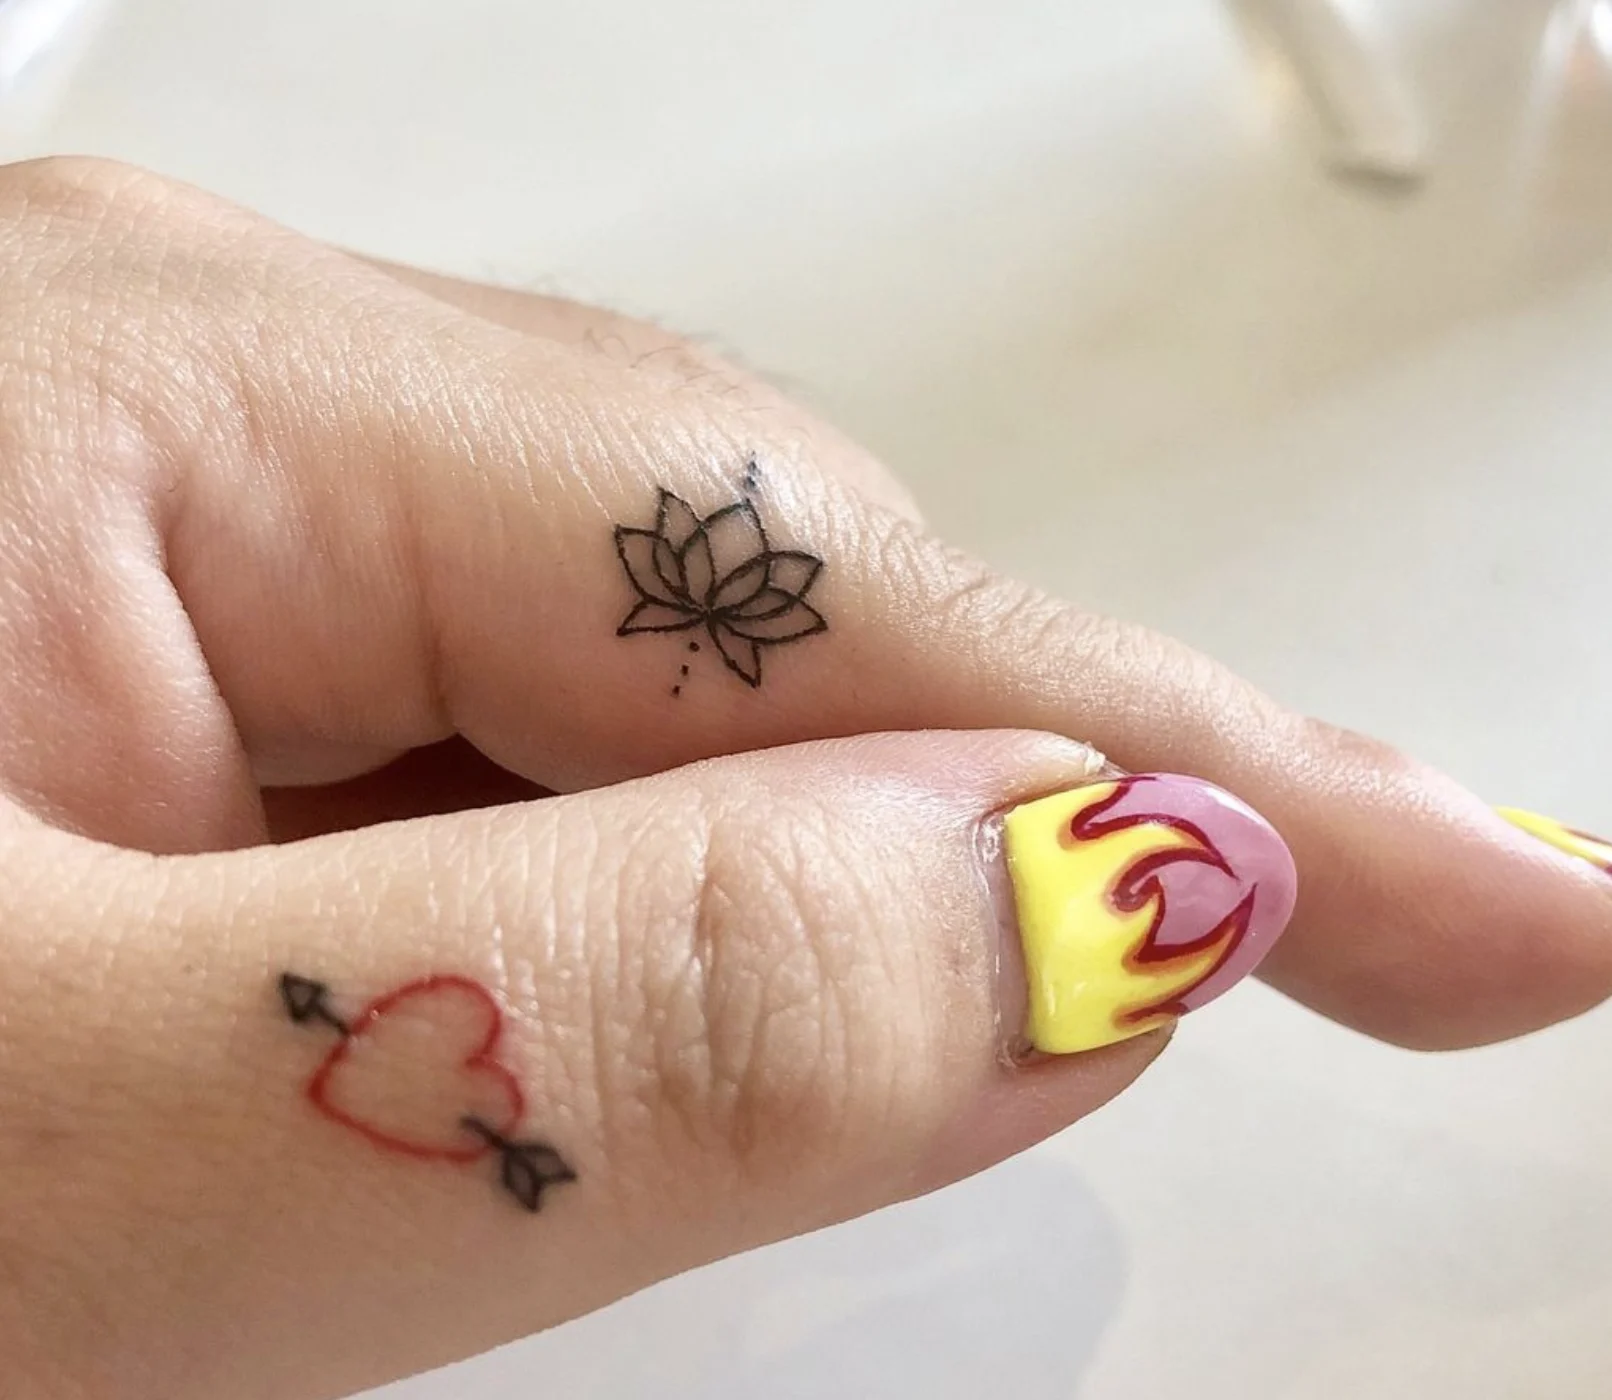 50 Pretty Finger Tattoo Ideas For Women That Are Simply Gorgeous